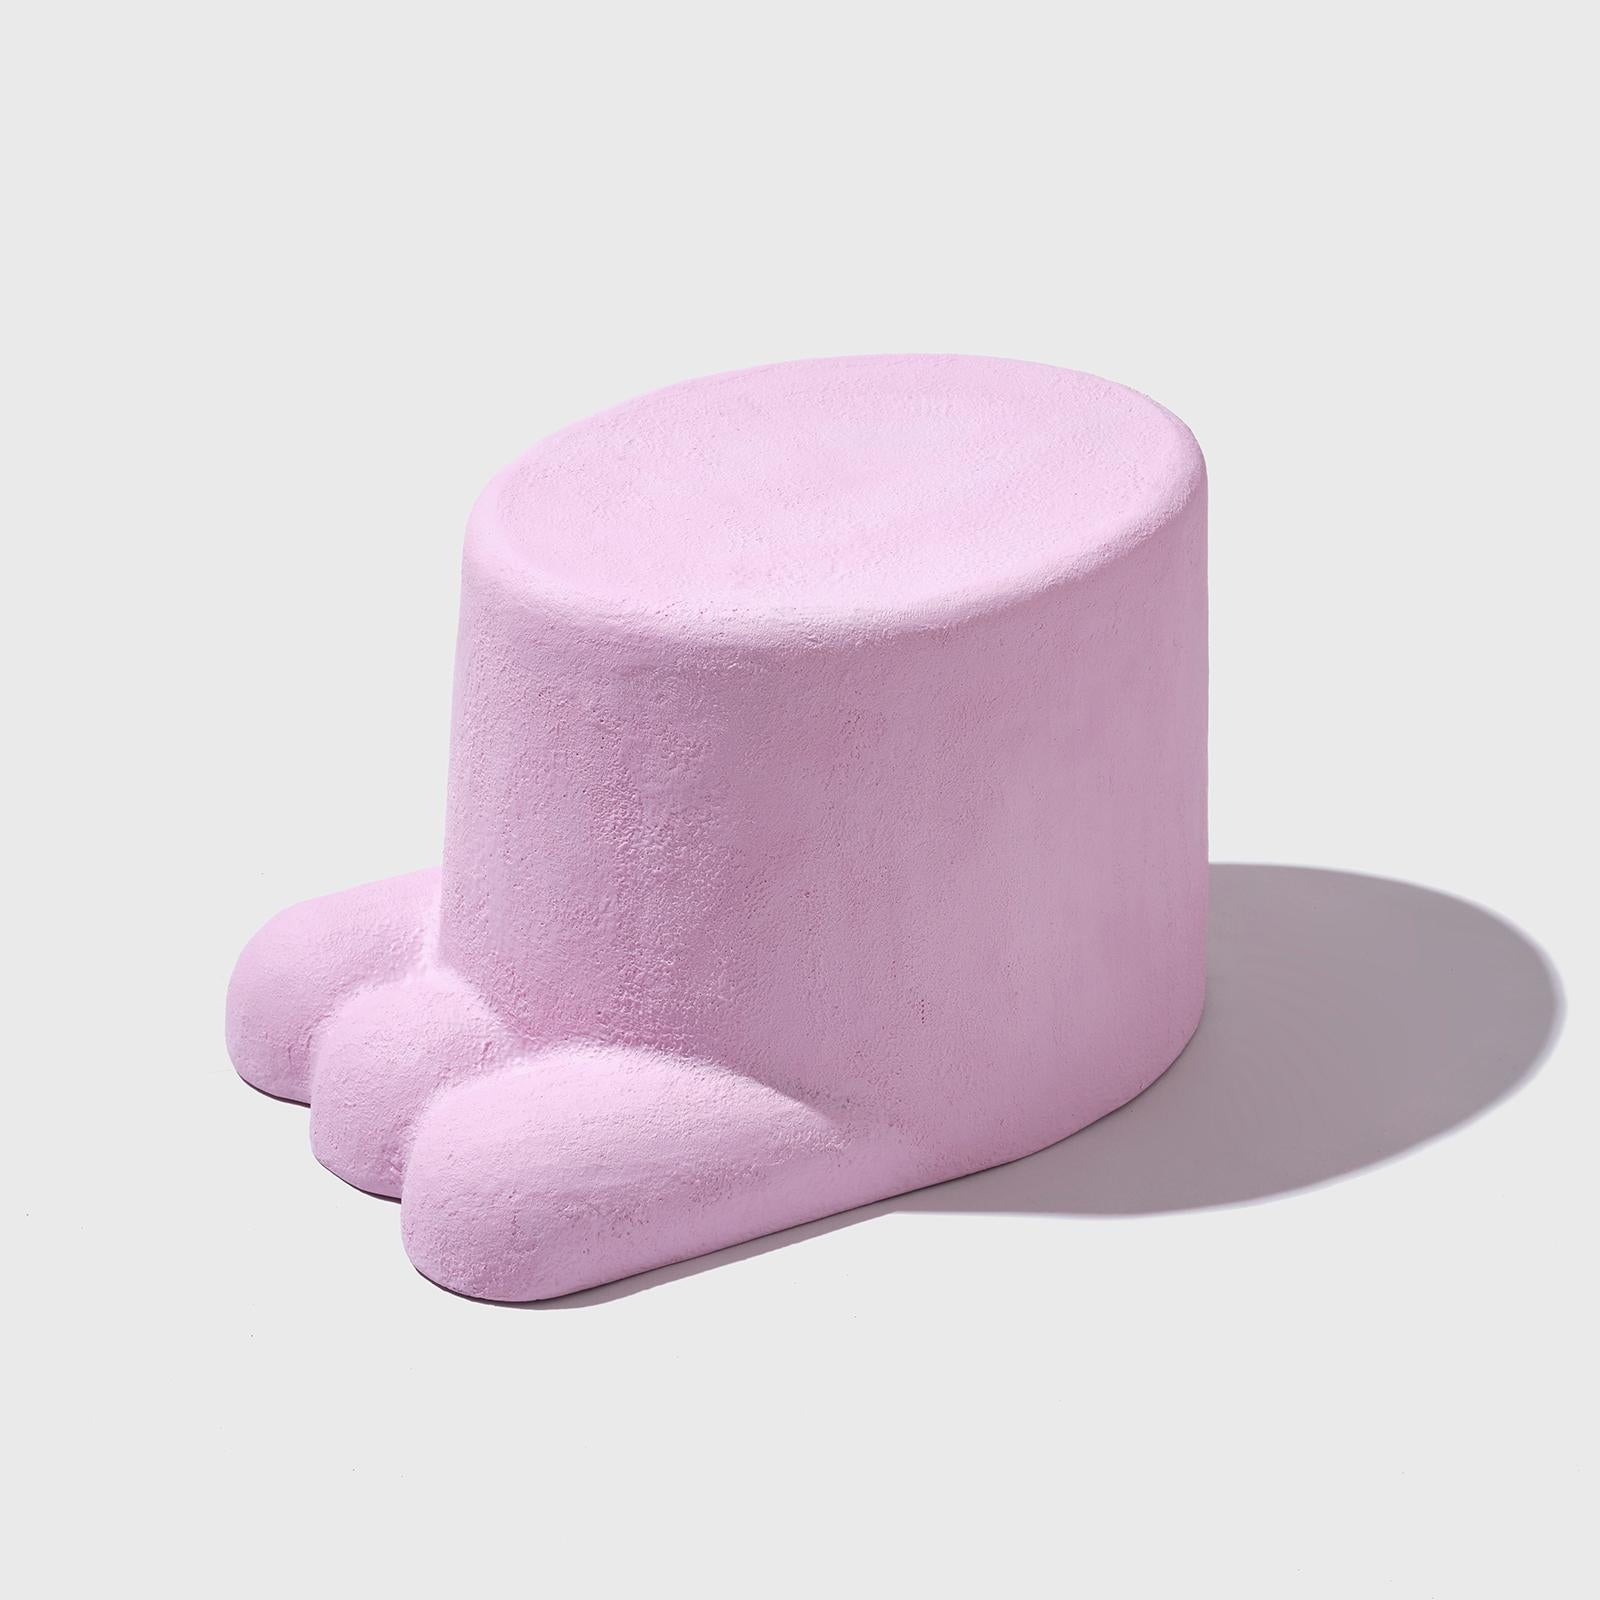 Mini paw stool by Hakmin Lee
Materials: FRP
Dimensions: 41 x 26 x H 26 cm
4 kg

Available in FRP yellow/ blue/ green/ pink/ white/ orange.


Studio HAK is Seoul based studio led by designer Hakmin Lee, who has an ambition of creating our